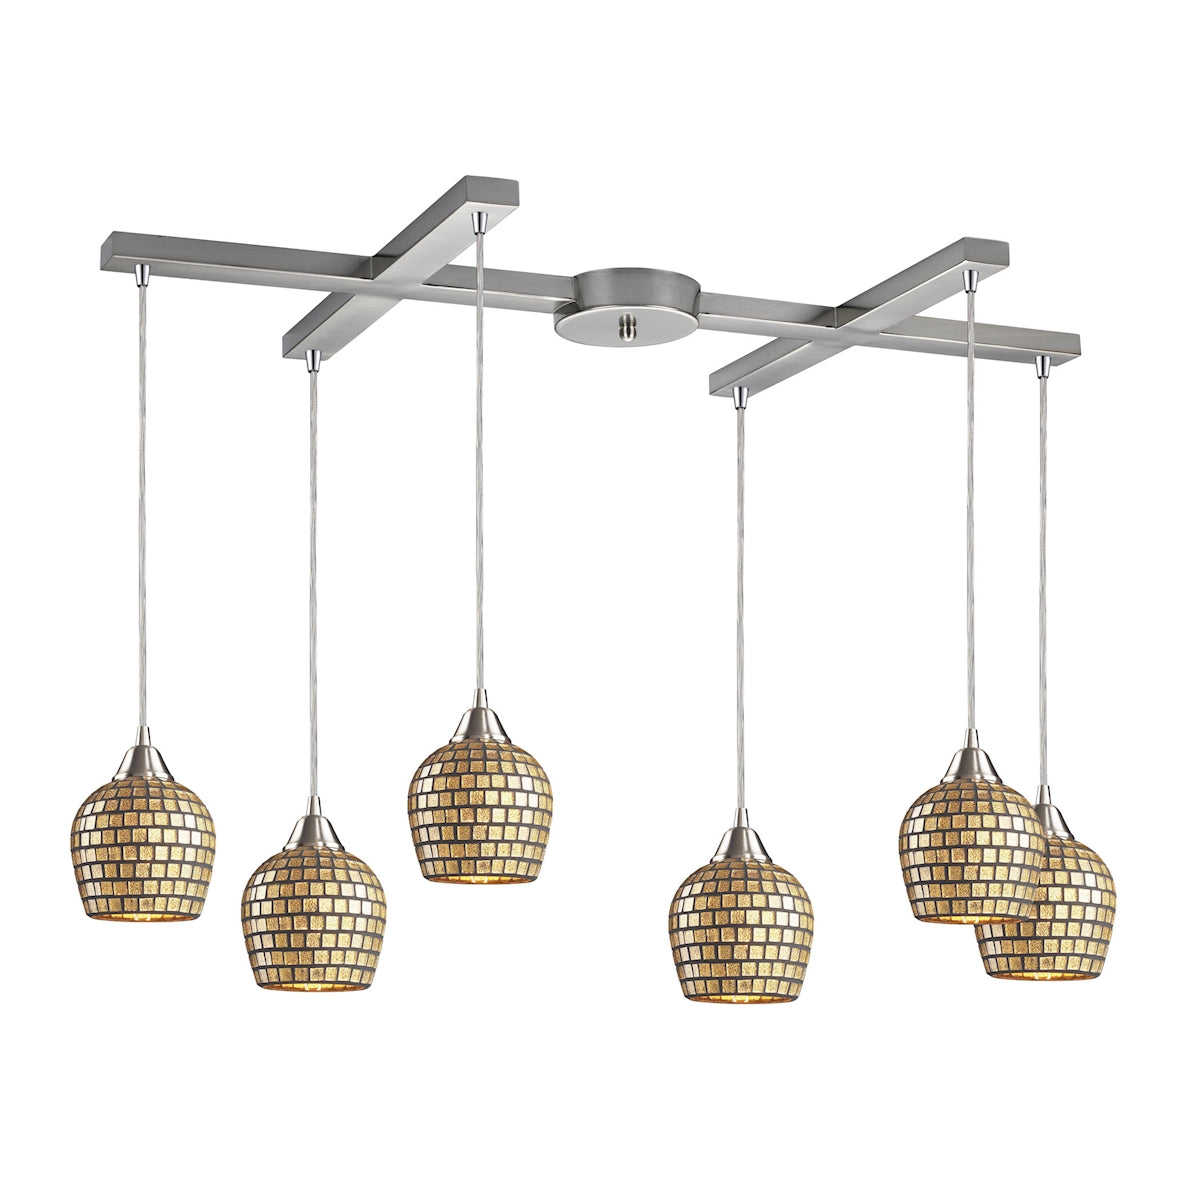 ELK Lighting 528-6GLD Fusion 6-Light H-Bar Pendant Fixture in Satin Nickel with Gold Leaf Mosaic Glass